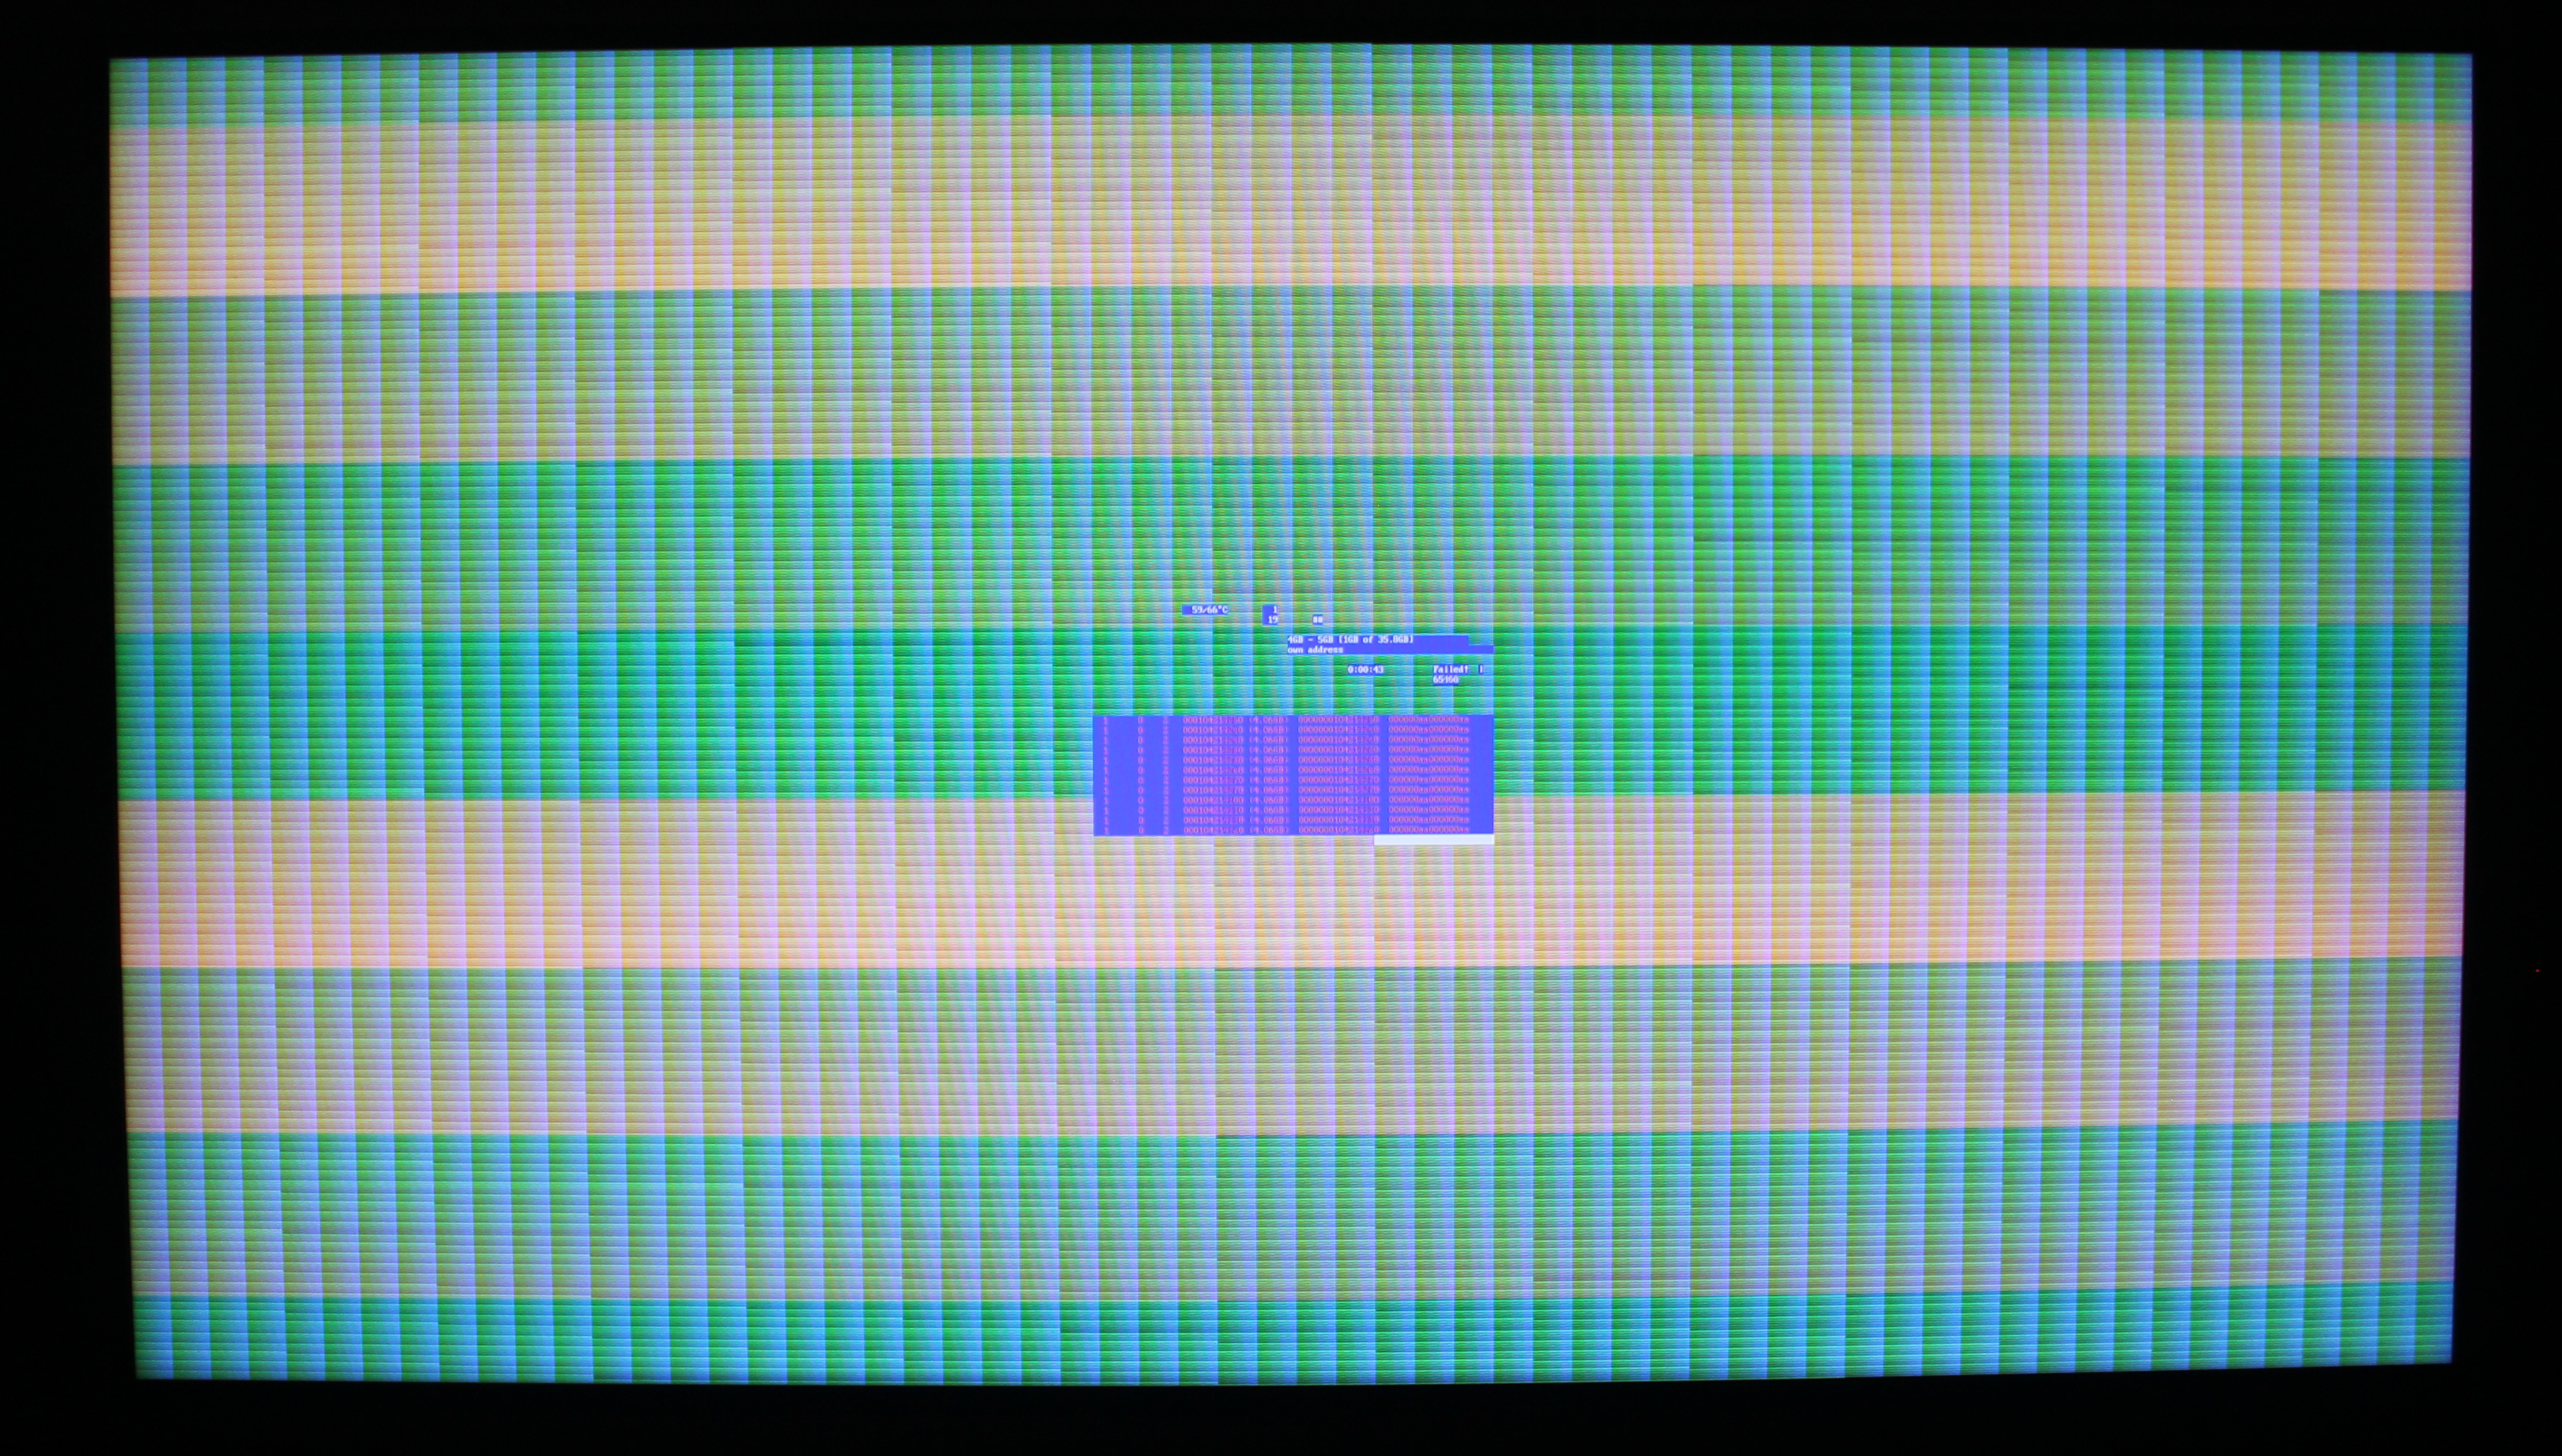 Photo of 4K TV showing stripe patterns with partial memtest86+ output.